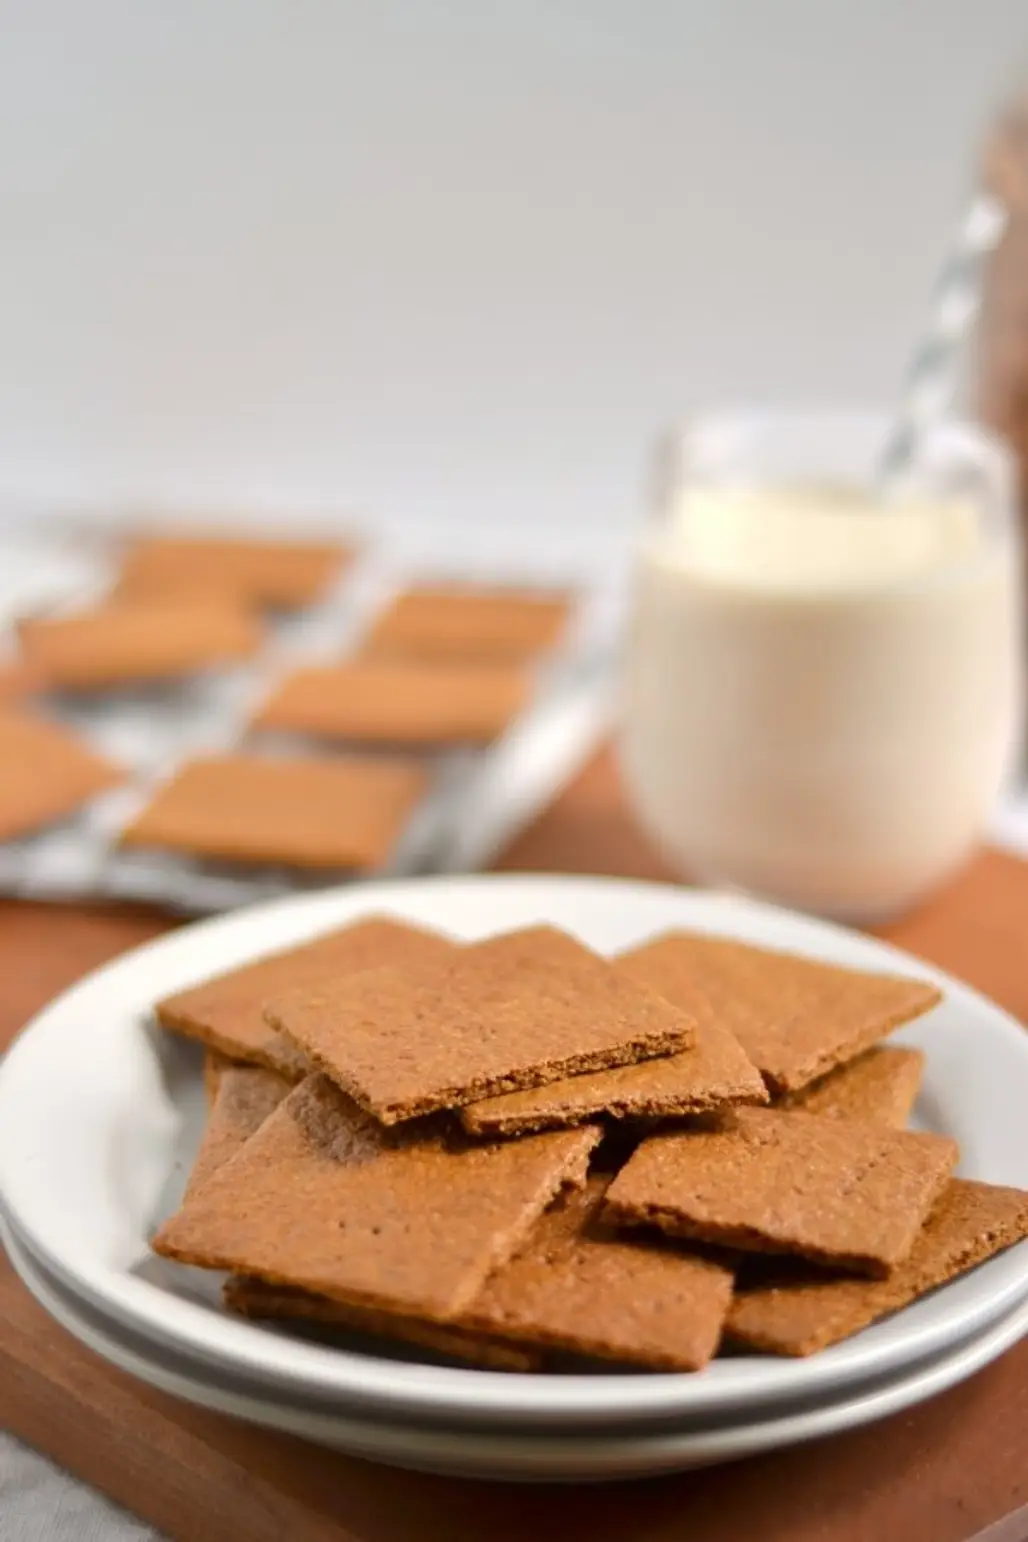 Gluten-free Crackers and Nut Butter